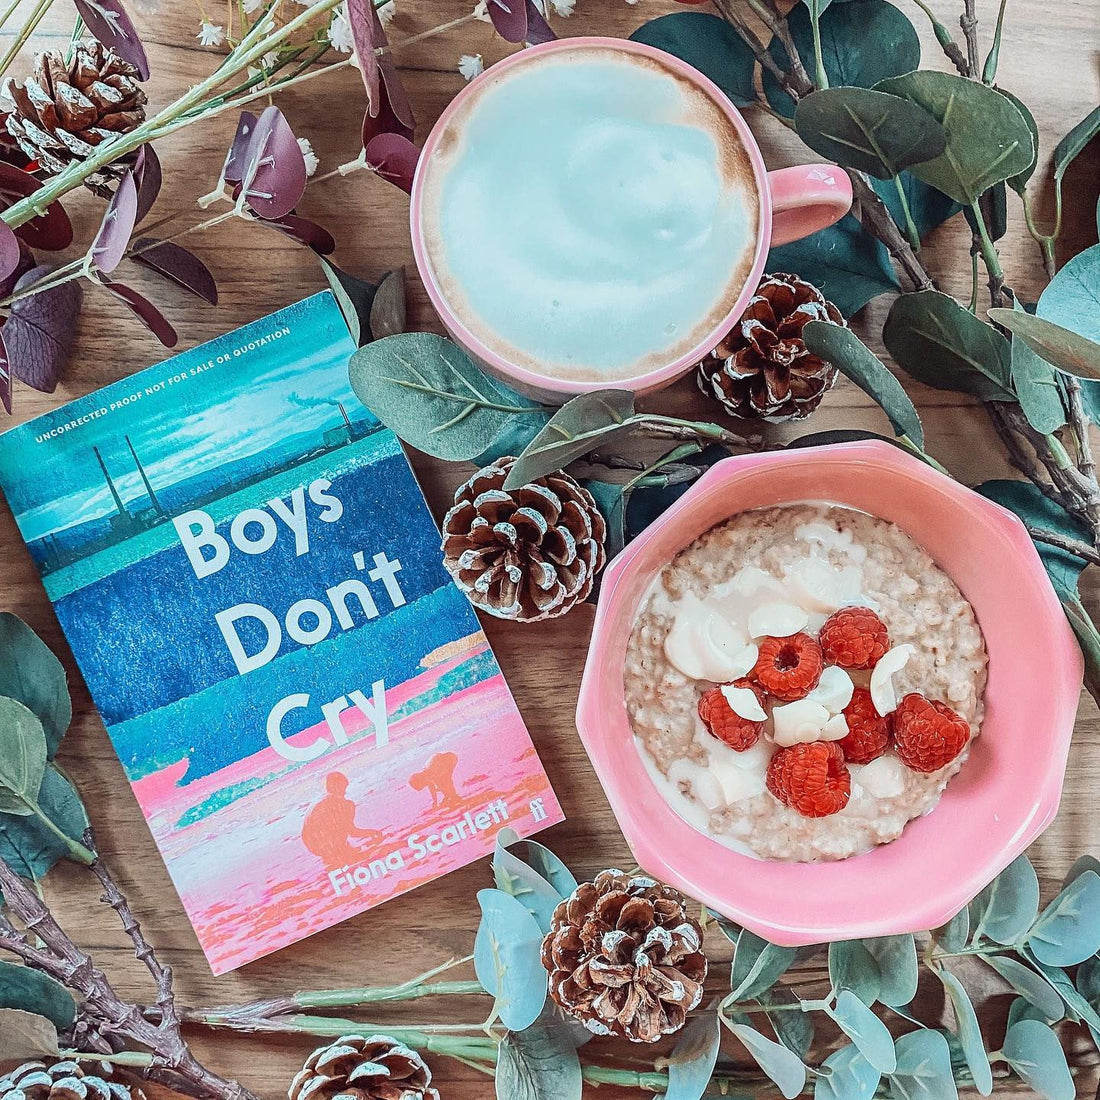 Book Review: Boys Don't Cry